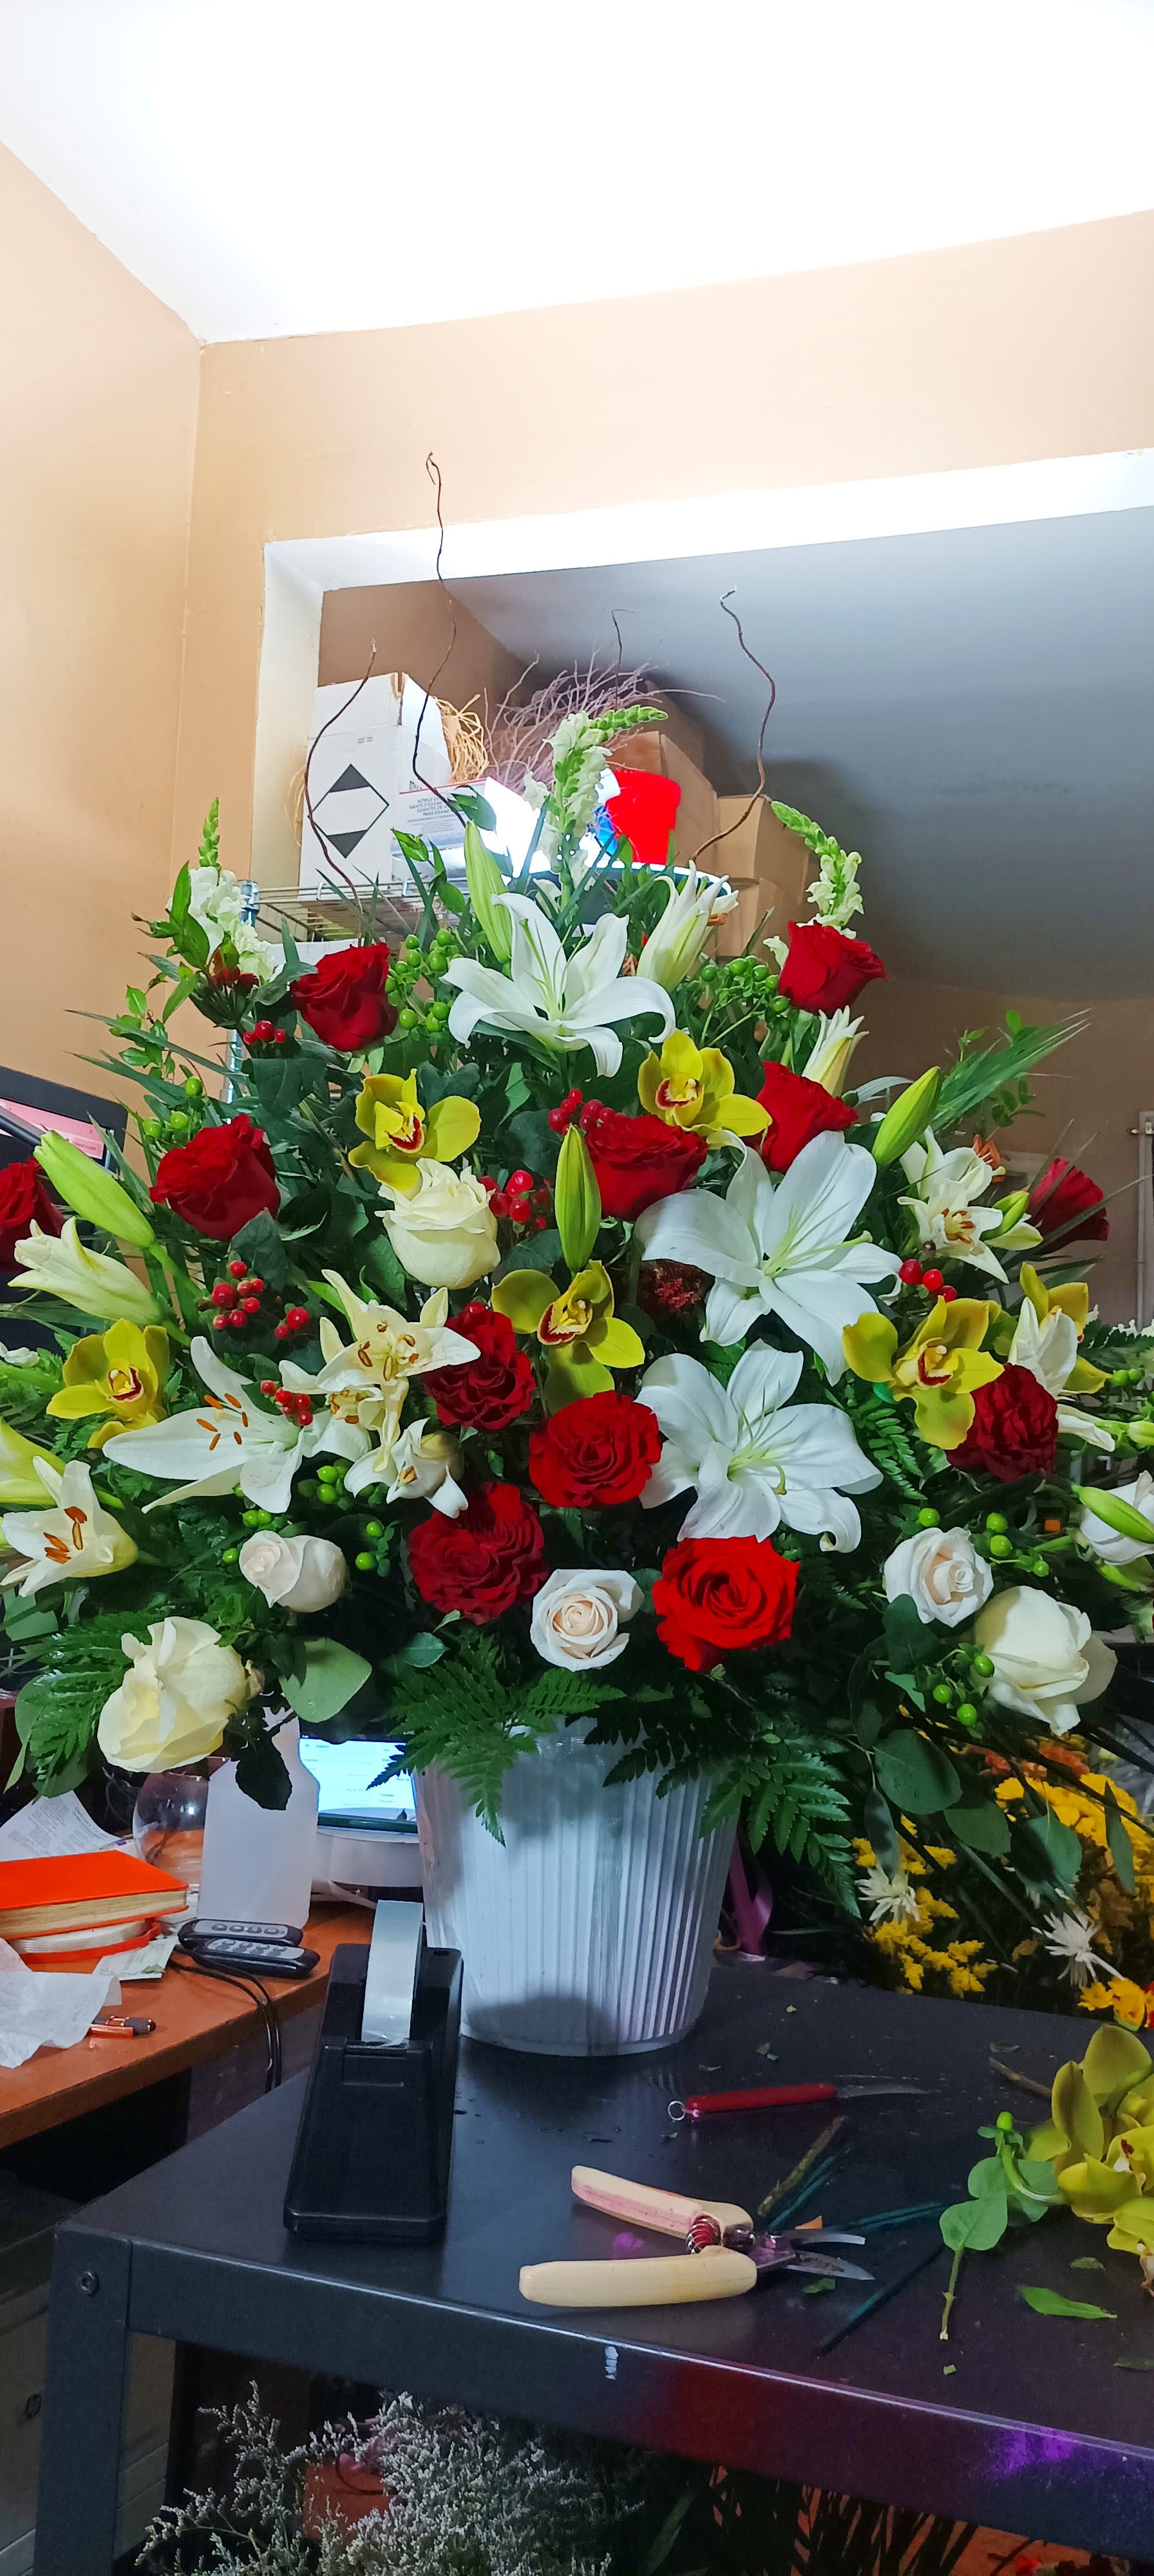 One sided Large Red and White Floral Basket - This is a beautiful and large red and white floral basket that can be used for big functions, church services, and is very elegant and beautiful. A mix of white oriental lilies, long stem red and white roses, red and green hypericum berries, lots of greenery and fillers. Truly a stunning beautiful centerpiece for your next service or party function.